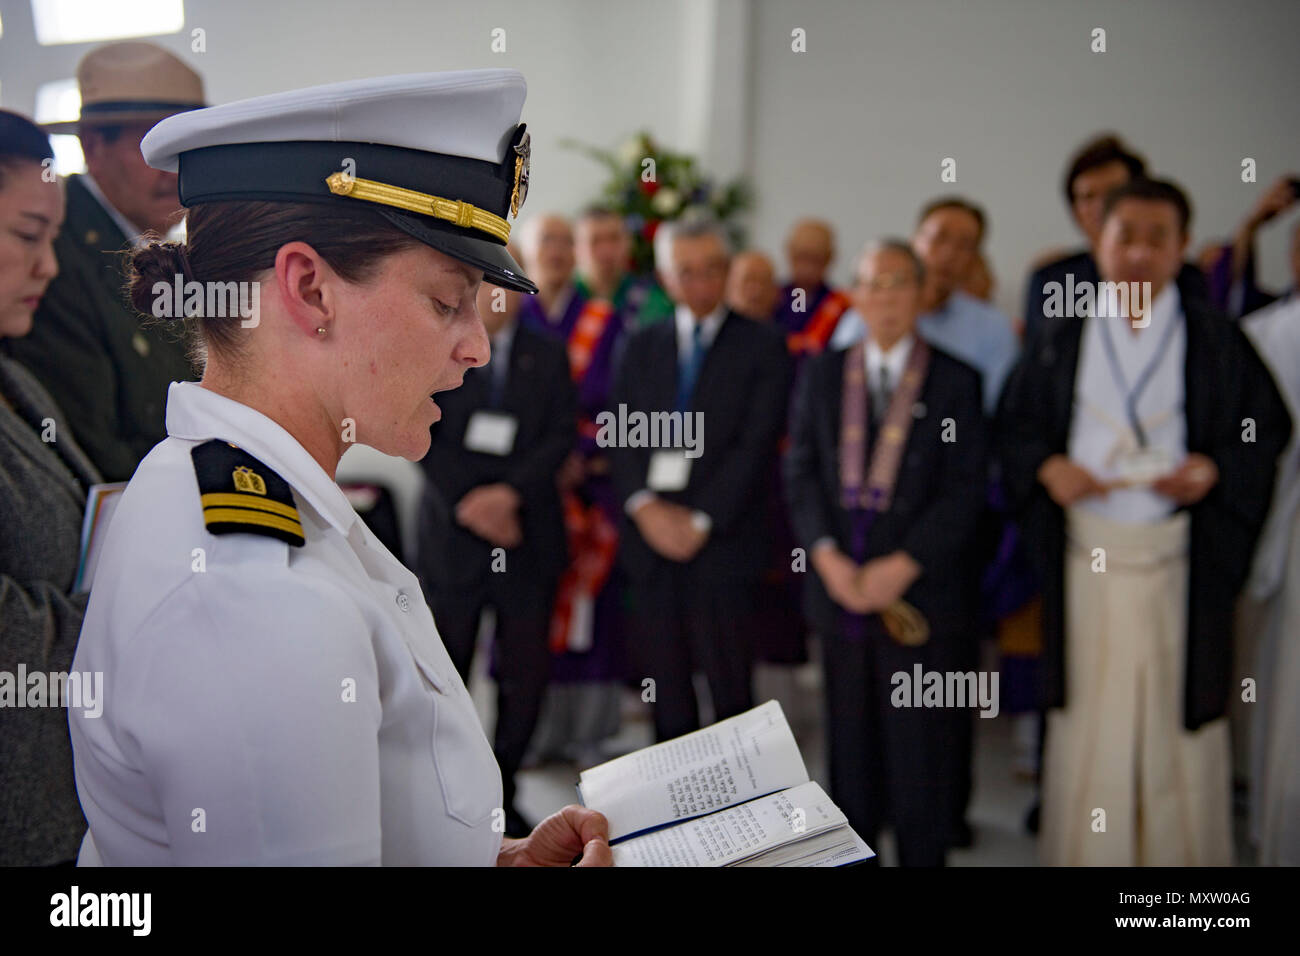 161206-N-YW024-054 PEARL HARBOR (Dec. 6, 2016) Lt. Emily Rosenzweig, a chaplain assigned to 3rd Radio Battalion Religious Ministry Team at Marine Corps Base Hawaii, reads a Hebrew prayer aboard the USS Arizona Memorial during an Interfaith Prayer service and Floral Tribute. The event allowed religious leaders from the U.S. military, Hawaii, and Japan to engage in prayer to honor the fallen service members. Dec. 7, 2016, marks the 75th anniversary of the attacks on Pearl Harbor and Oahu. Since Dec. 7, 1941, the U.S. and Japan have endured more than 70 years of continued peace, a cornerstone of  Stock Photo